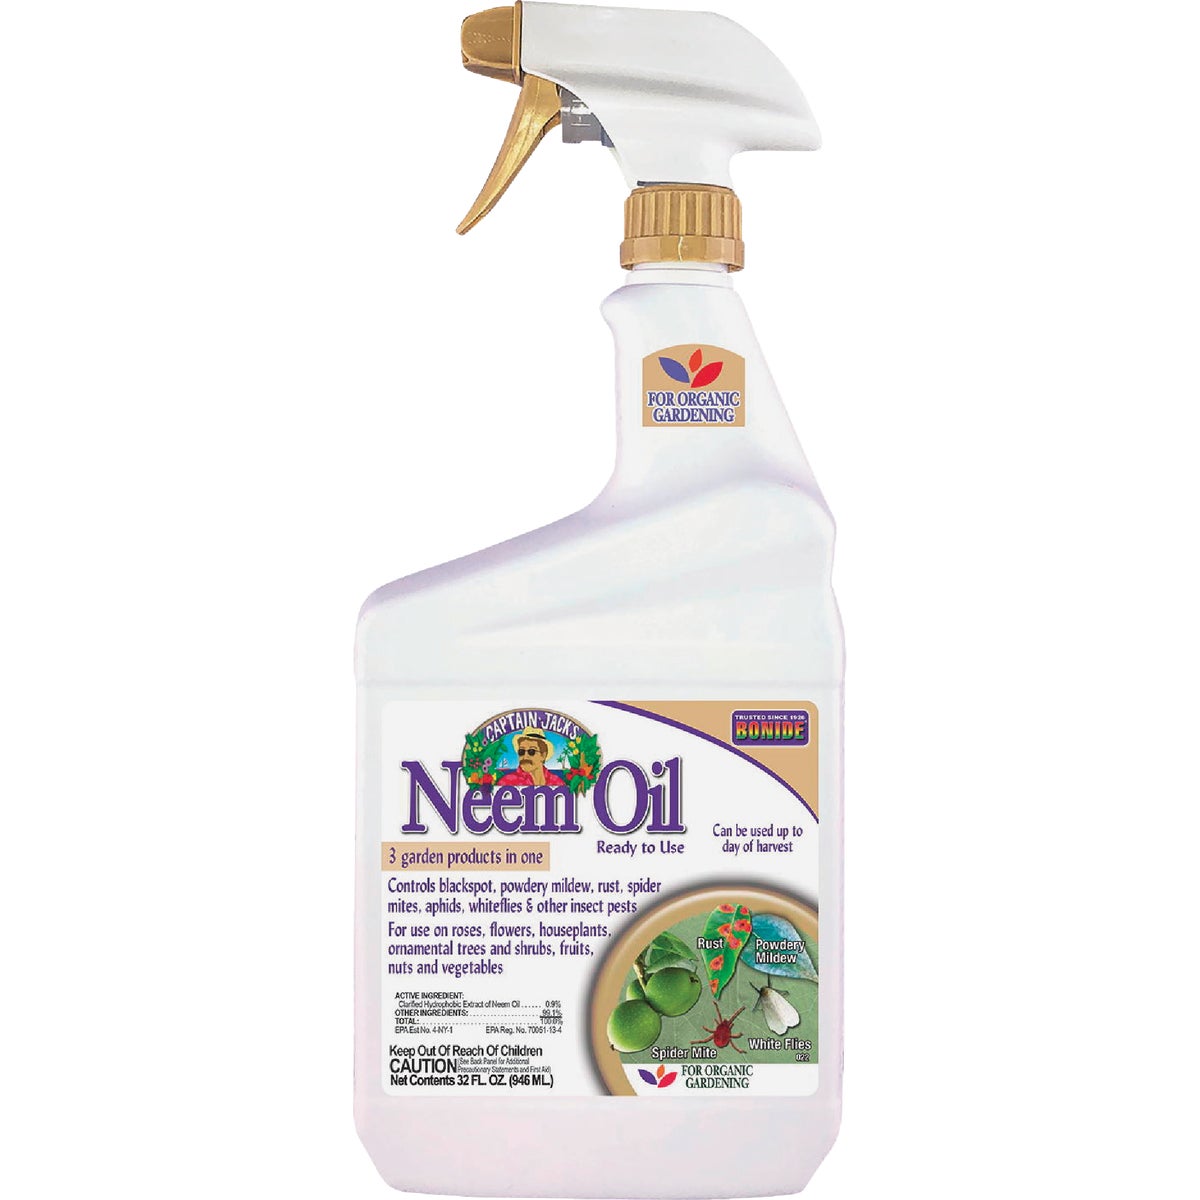 Item 700190, Protect your lawn and garden with Neem Oil from Captain Jack's.